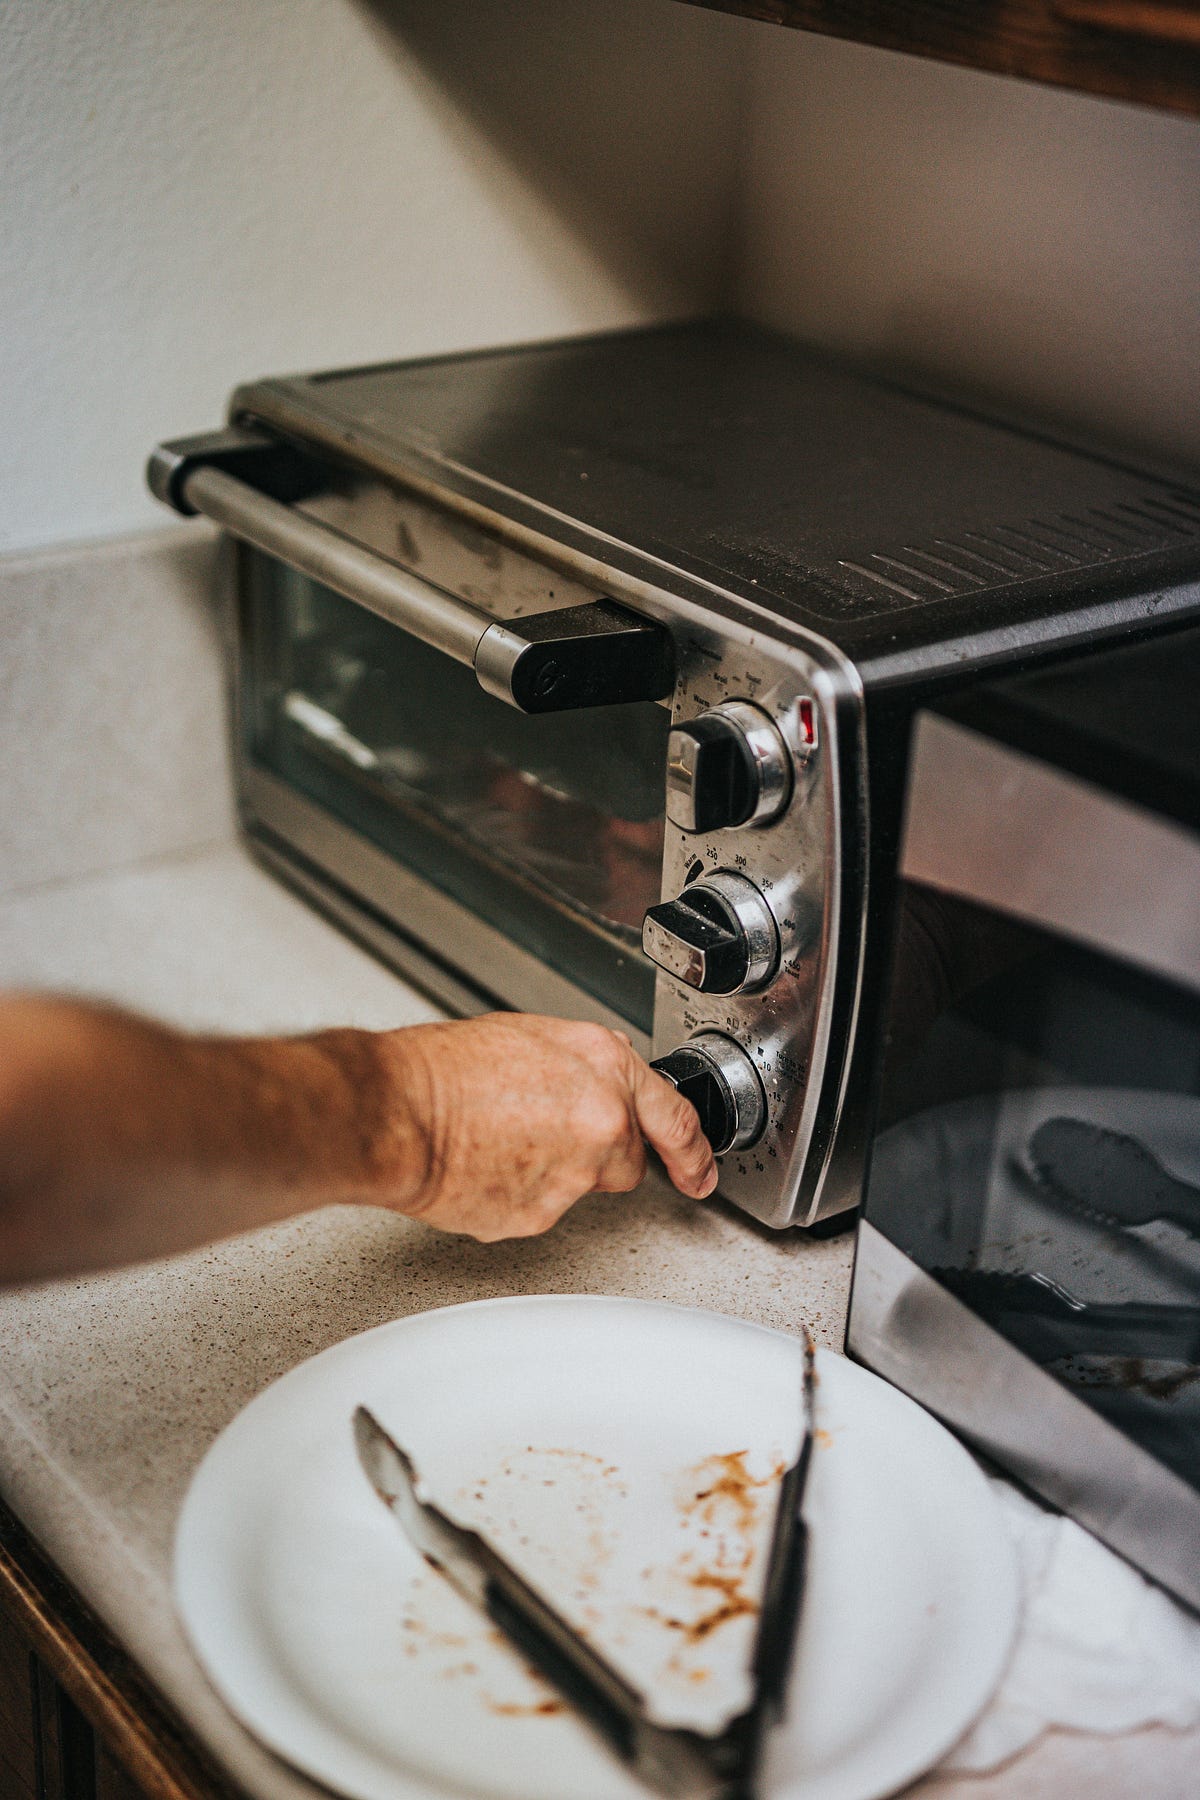 Toaster Oven: A Culinary Marvel for Your Kitchen